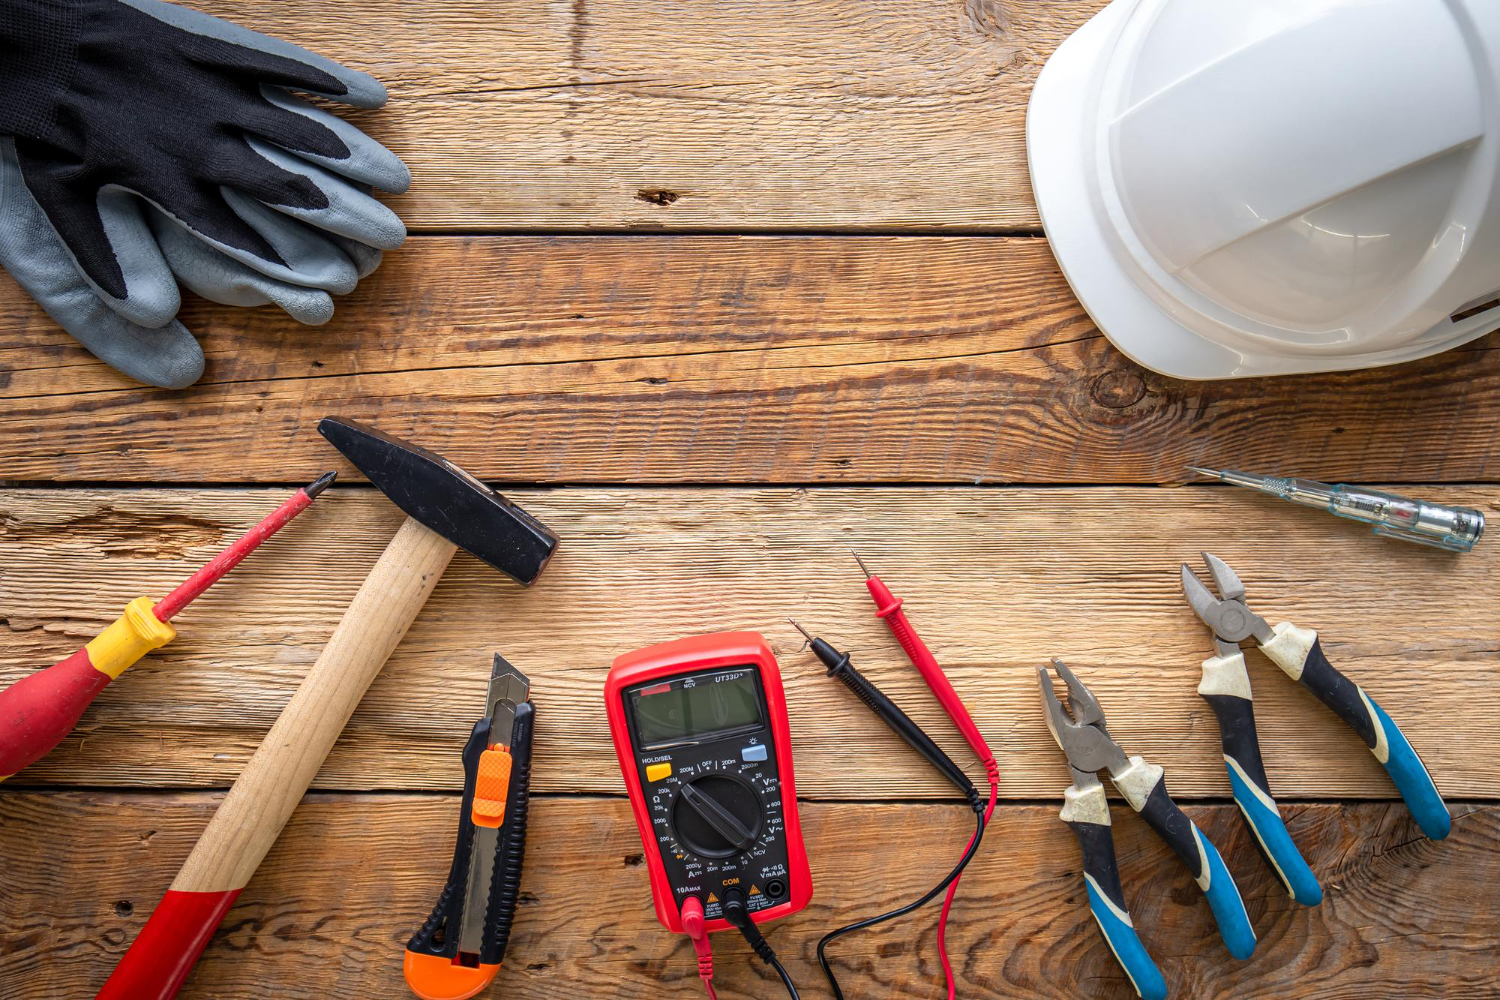 Upgrade Your Living Space: The Benefits of Hiring an Electrical Contractor for Your Renovation